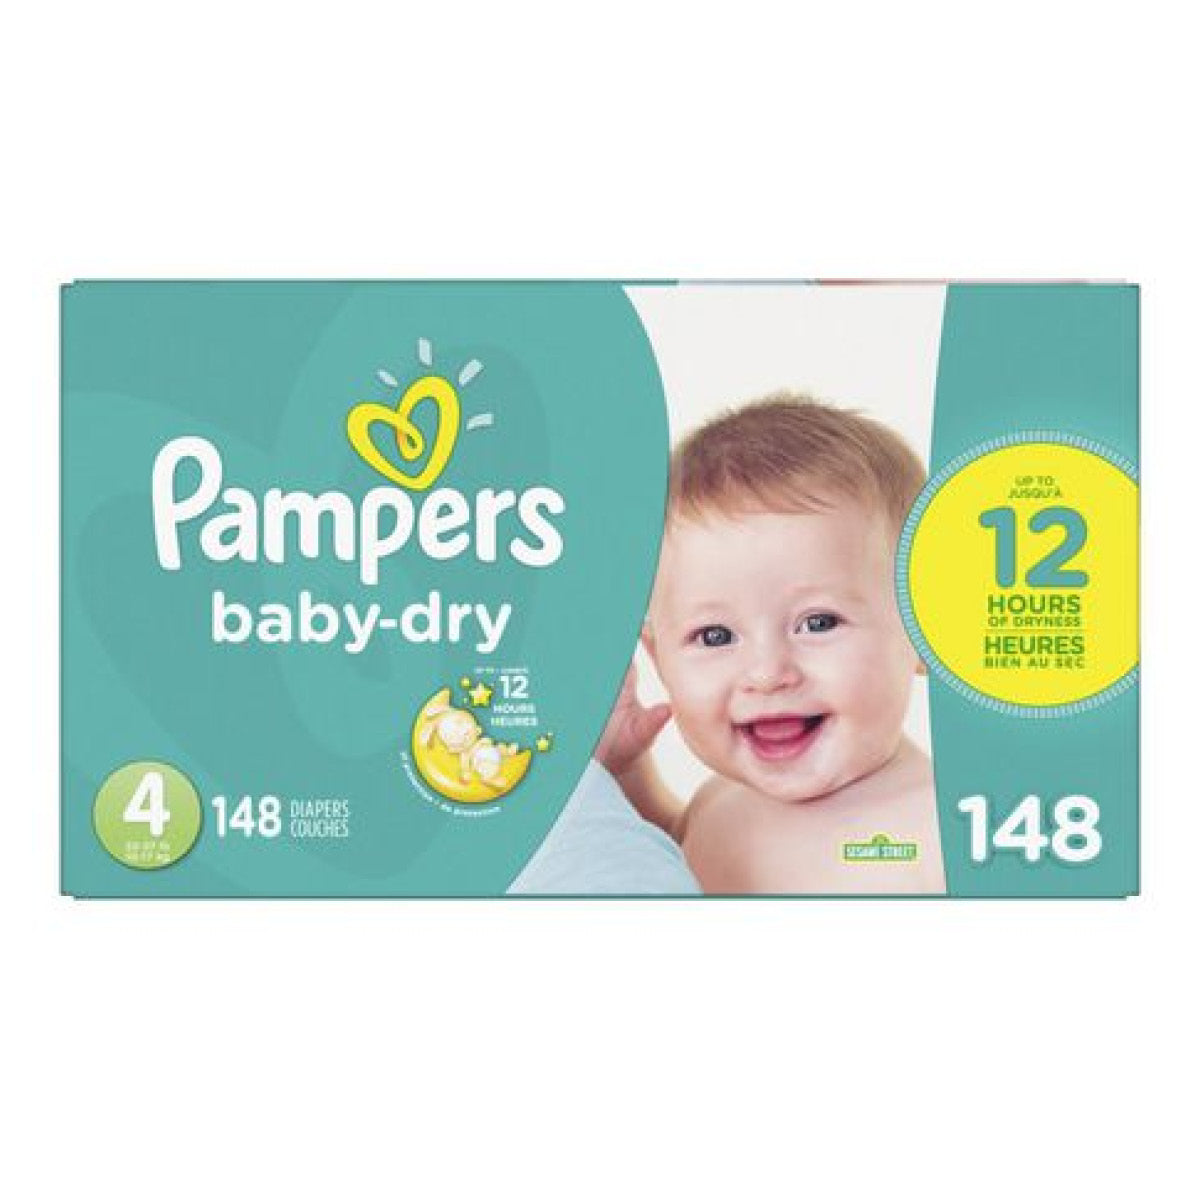 Pampers Baby-Dry Diapers Size 4, 148pk